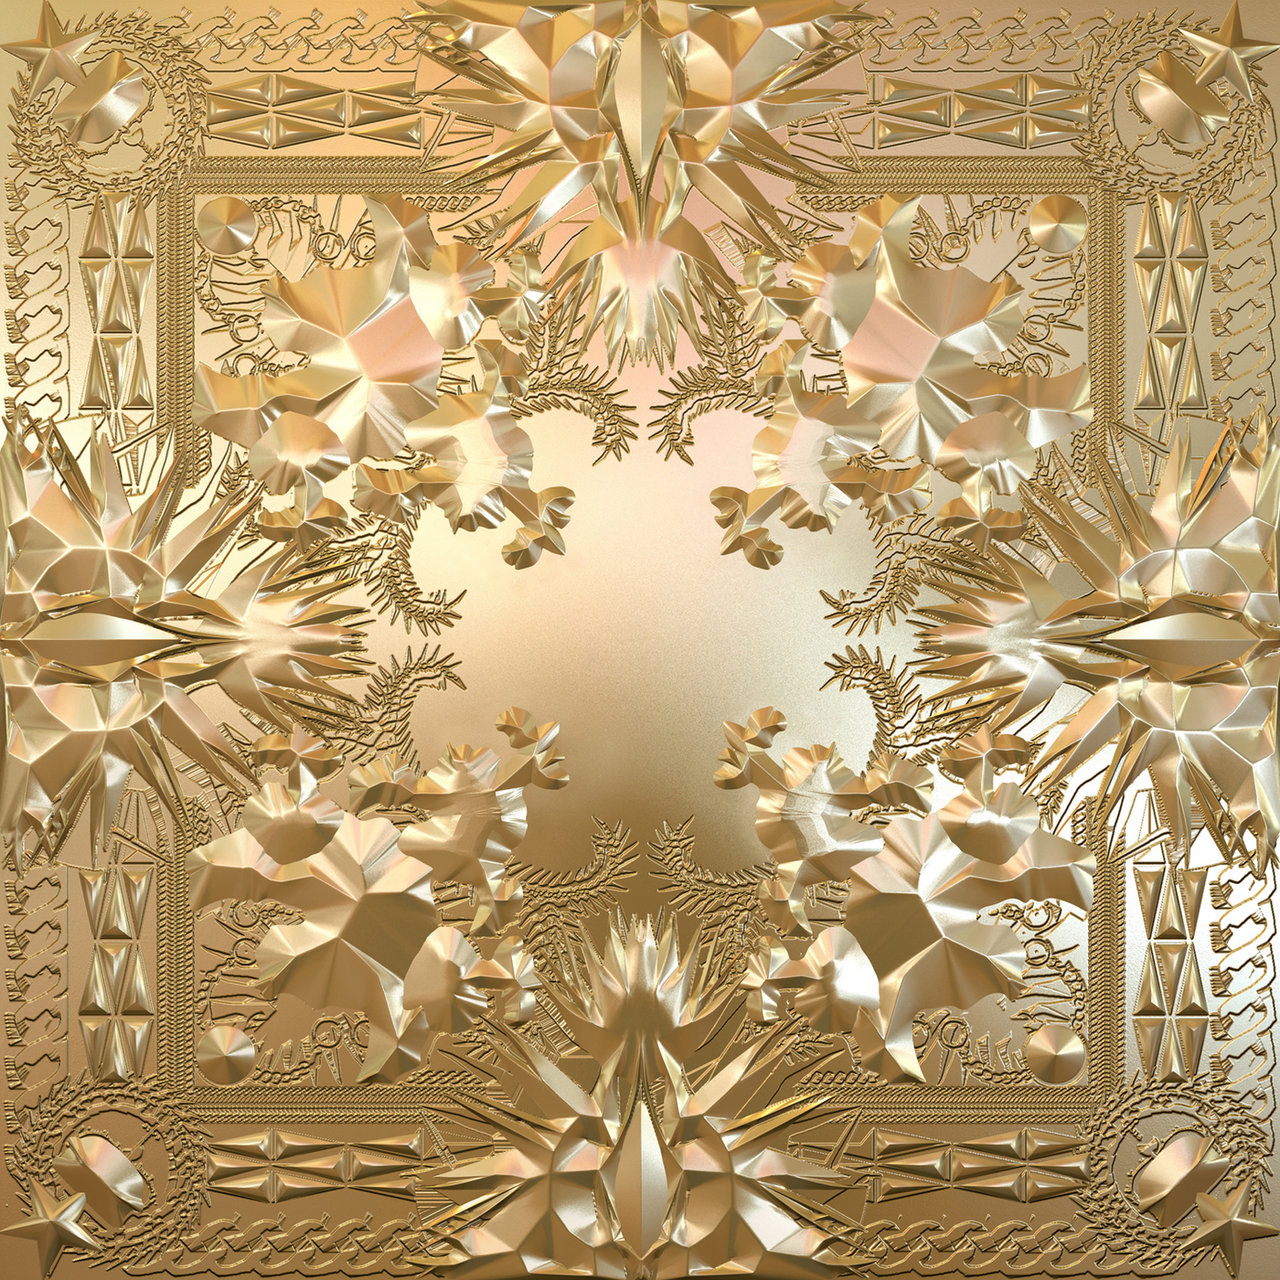 Jay-Z and Kanye West - Watch The Throne (Cover)